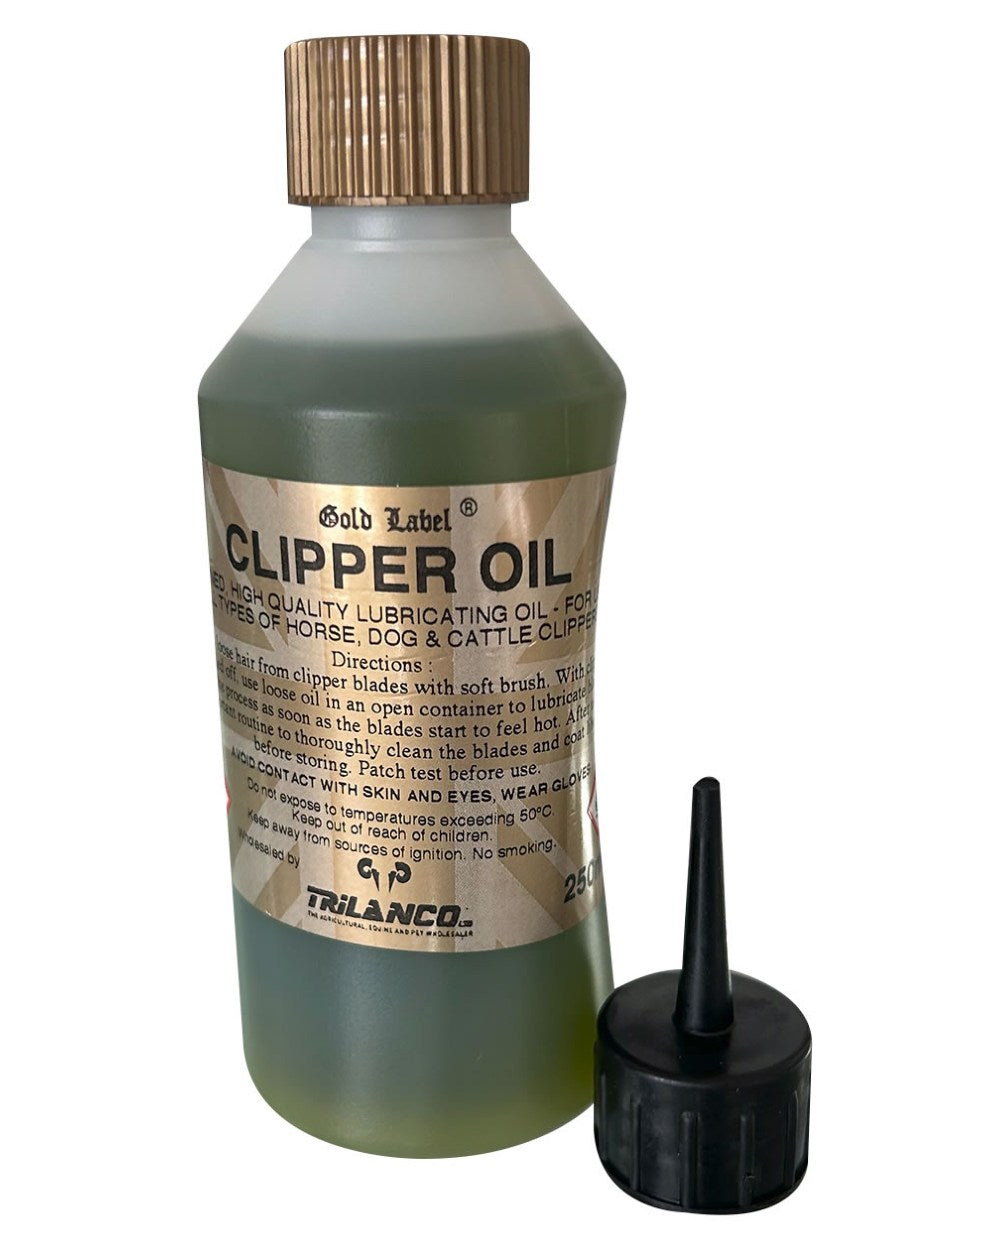 Gold Label Clipper Oil On A White Background